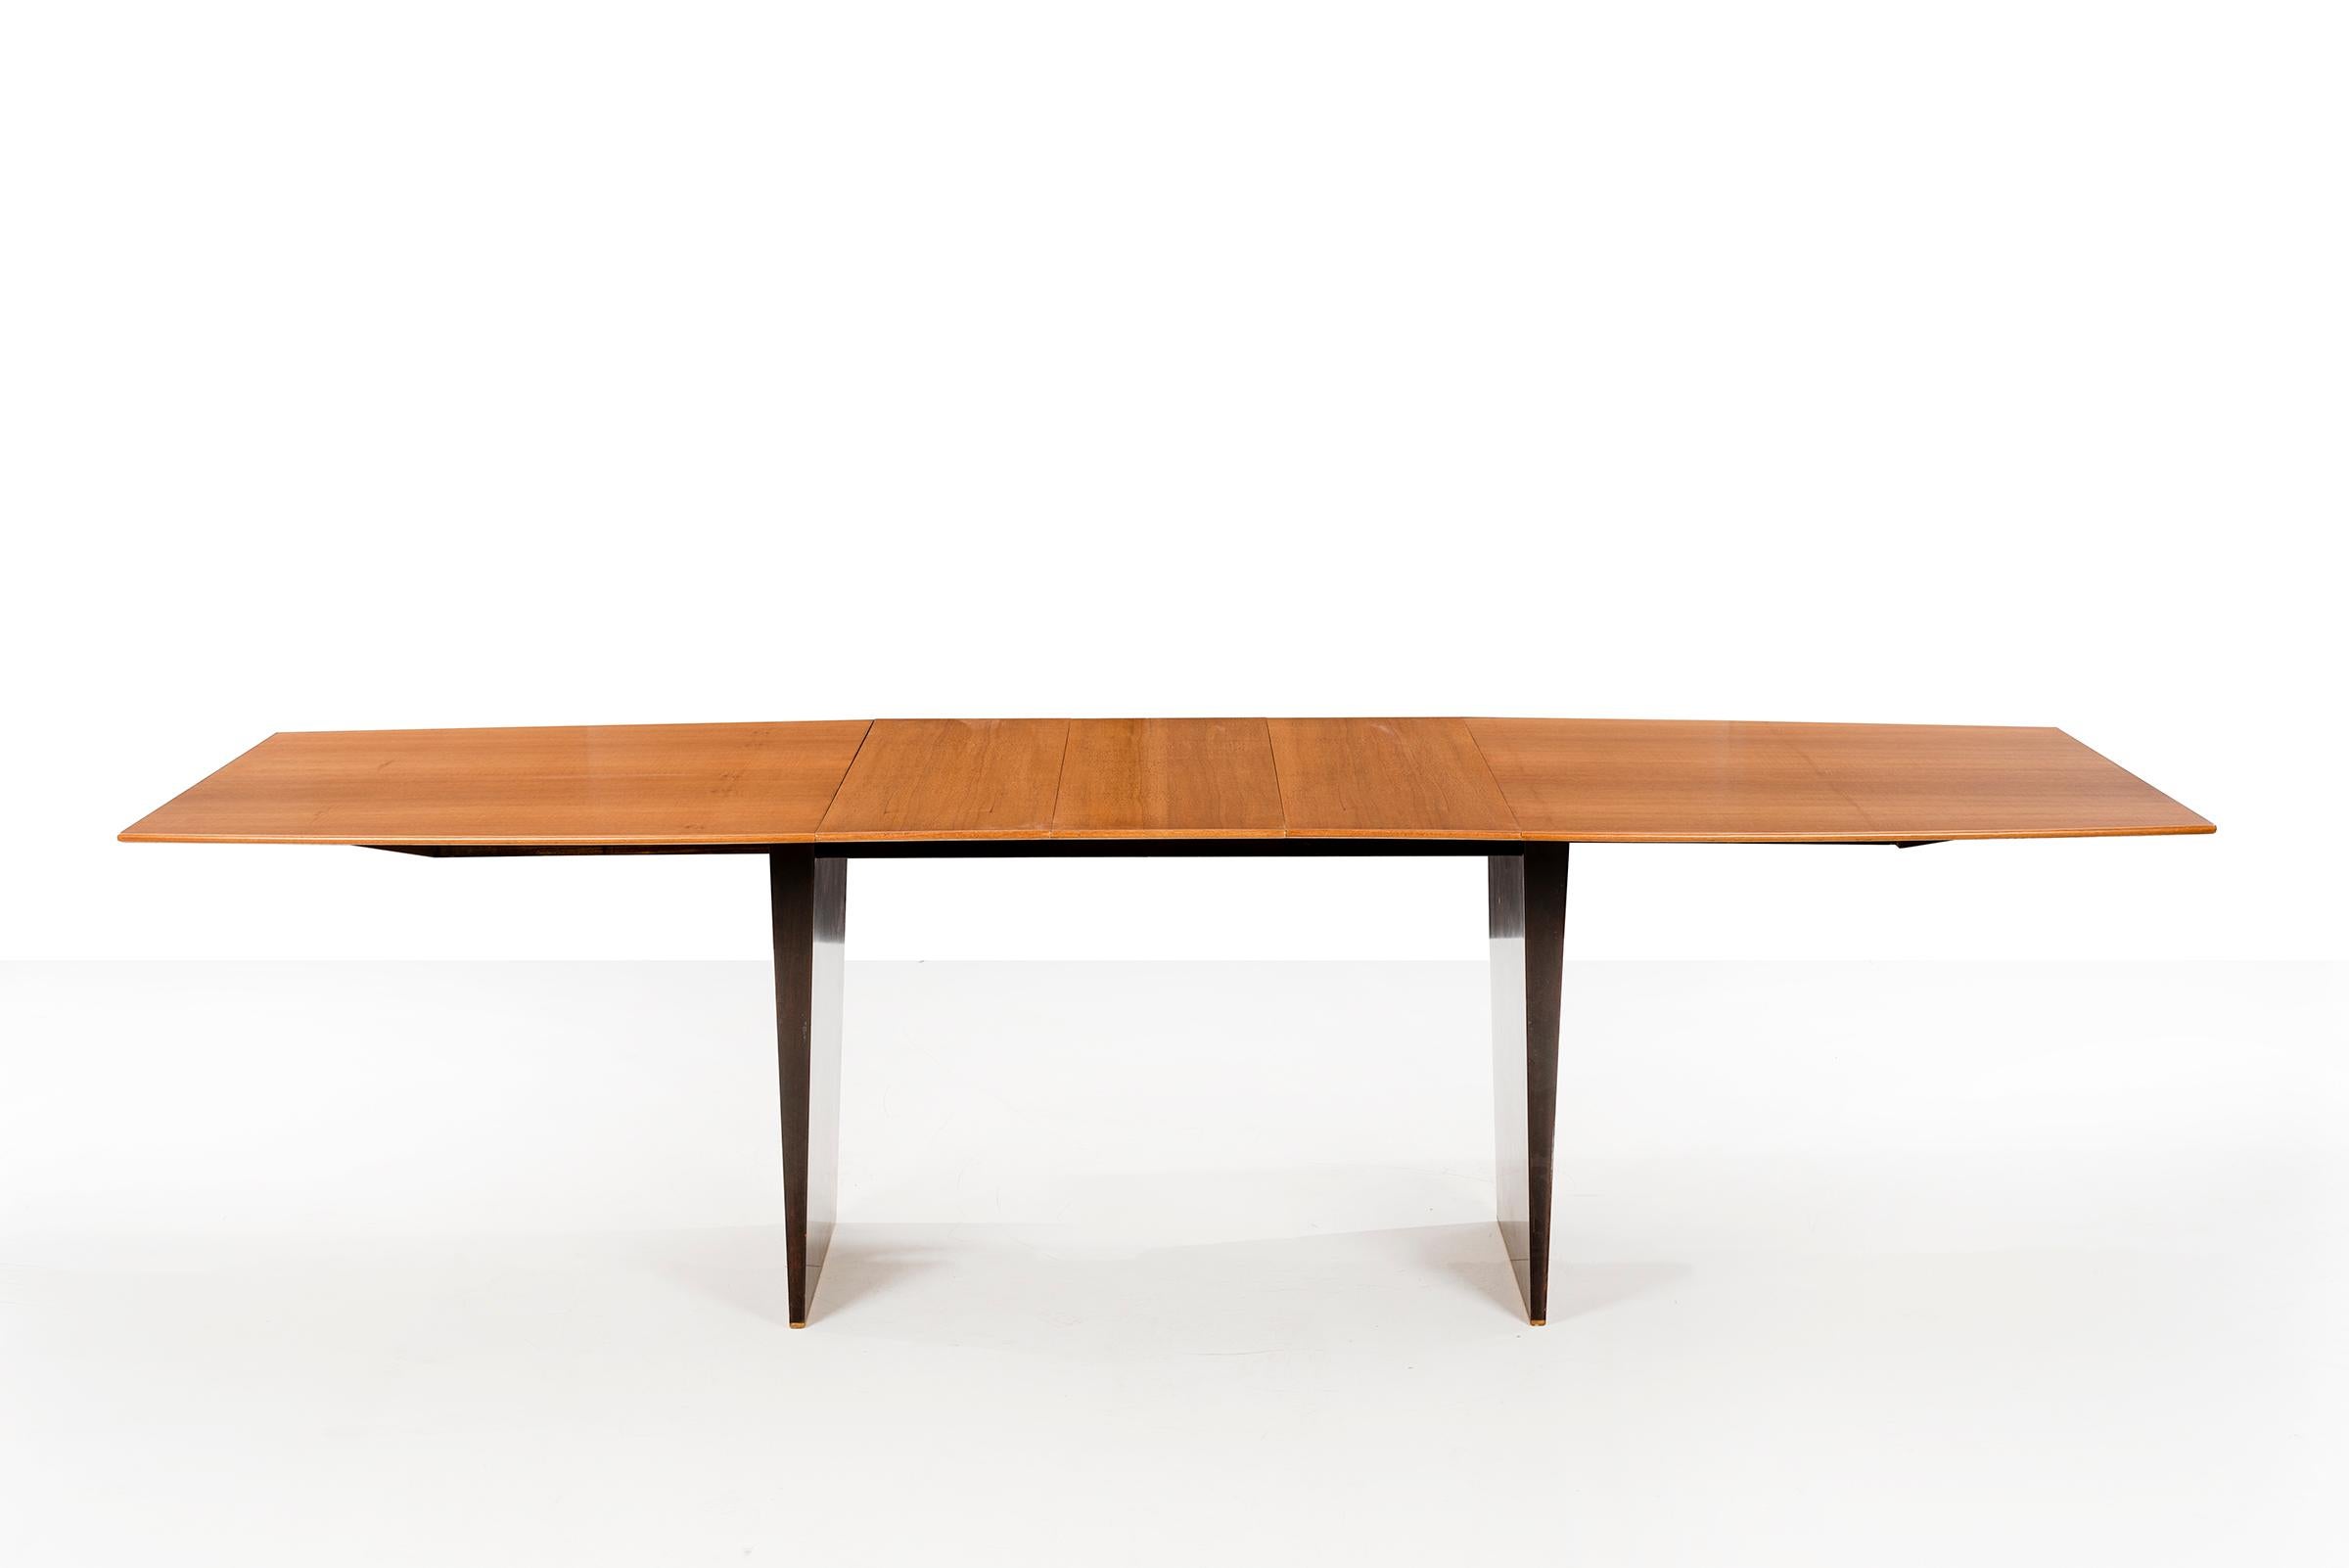 EDWARD WORMLEY (1907 - 1995)
Model no. 5640 Dining Table
Boat-shaped tawi wood dining table raised on a pair of wide tapering mahogany legs with brass sabots.
 Featuring 3, 12 inch leaves in opposing grainwork. The table is 108 inches when fully